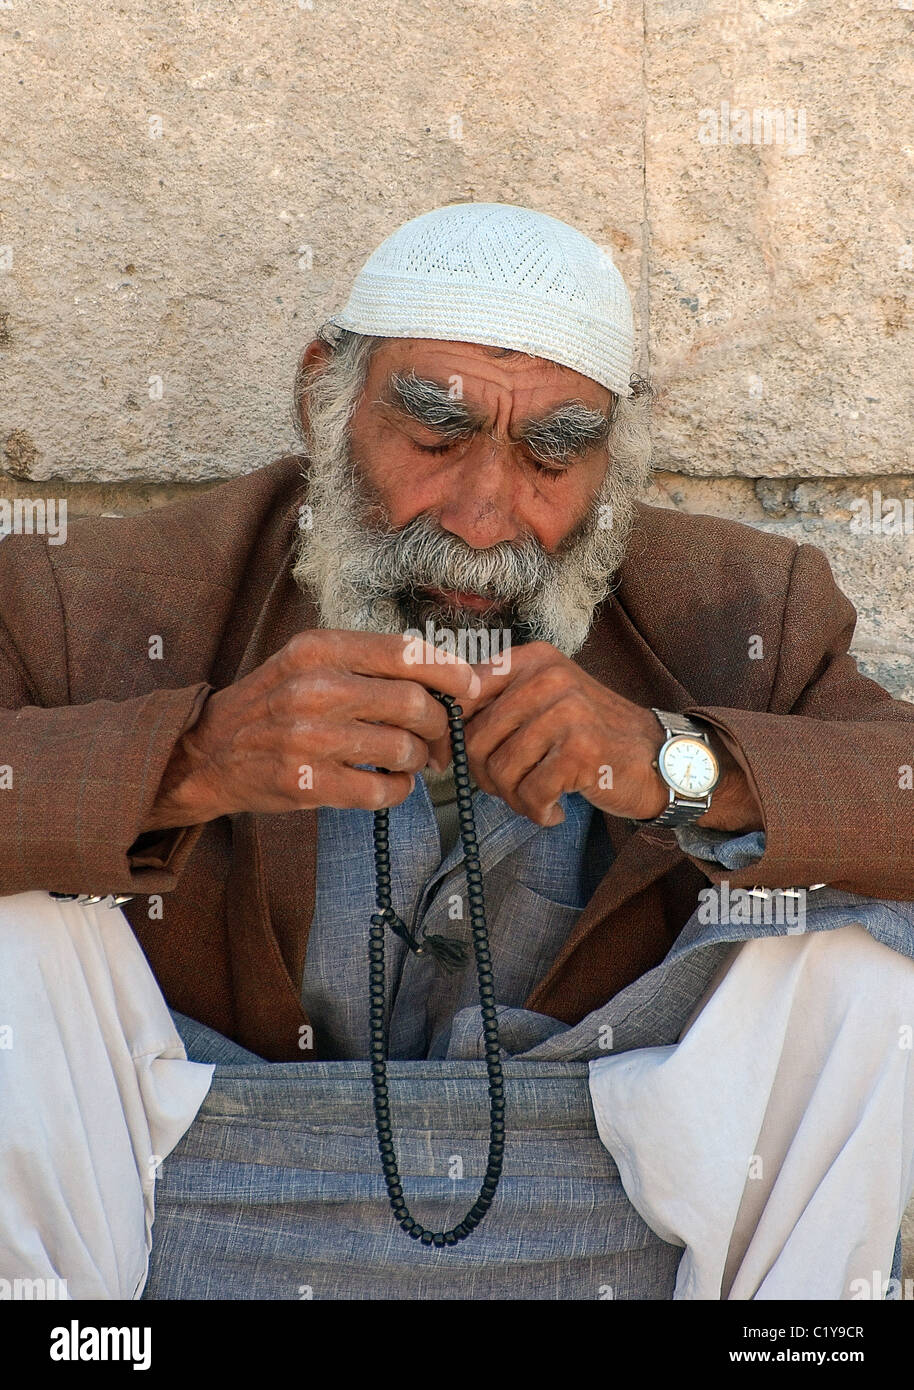 An elderly Syrian man with a gray beard thoughtfully sits and prays his prayer beads, Aleppo, Syria Stock Photo